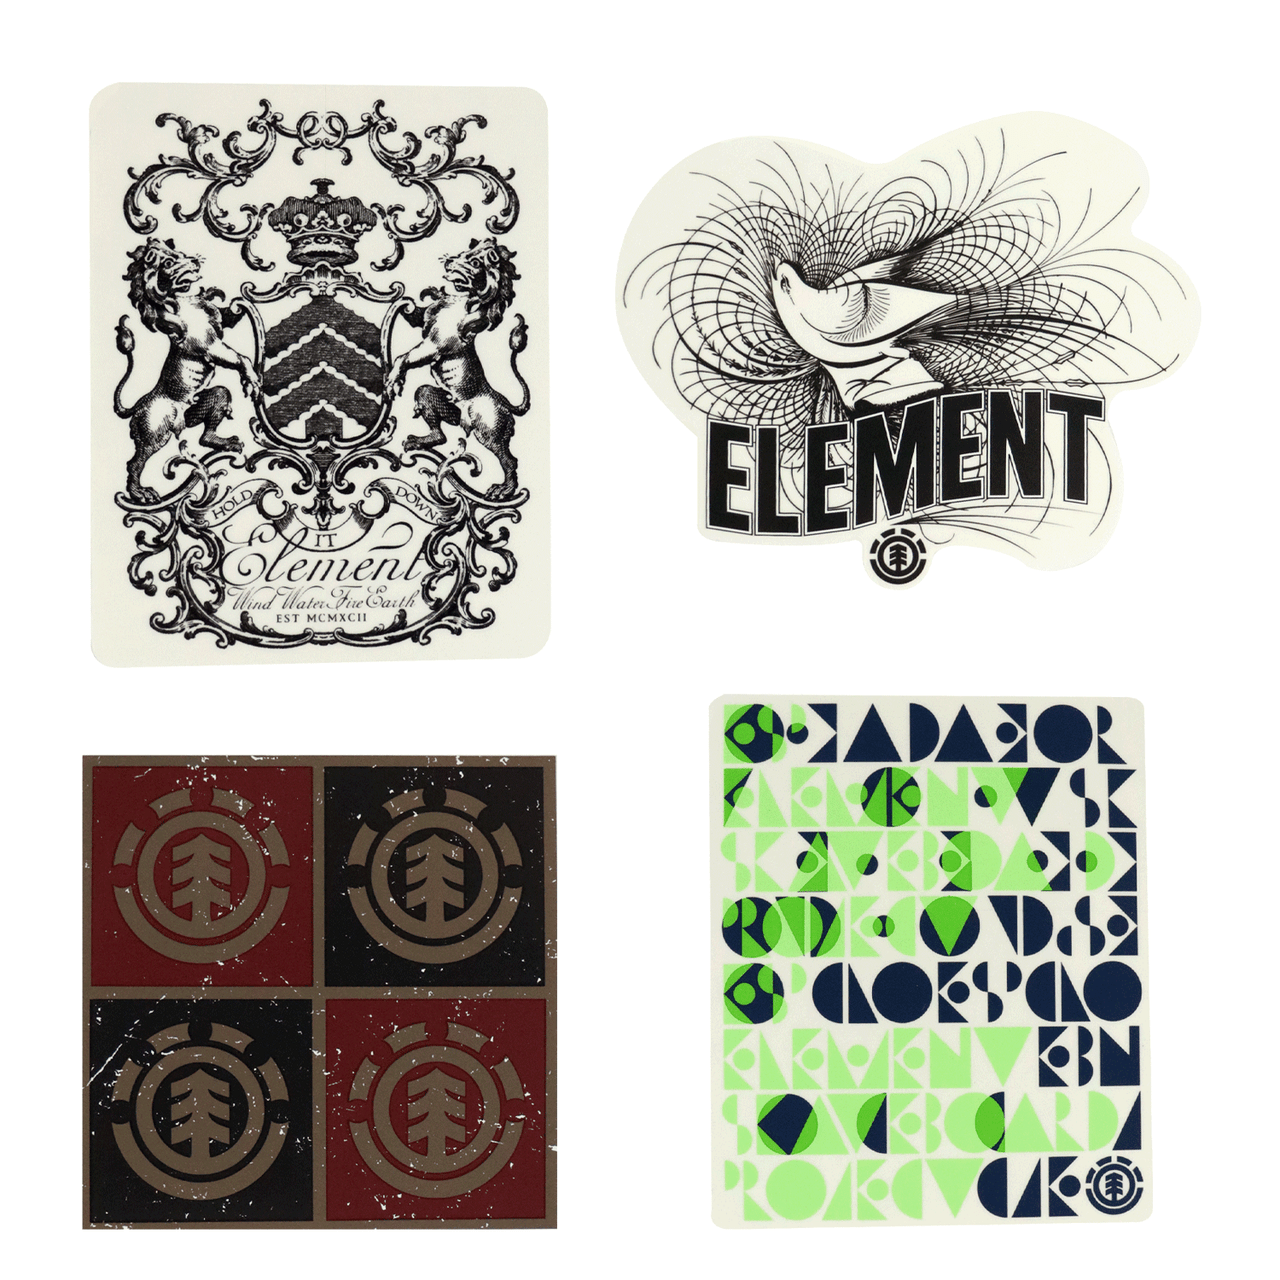 Elements Pack 2